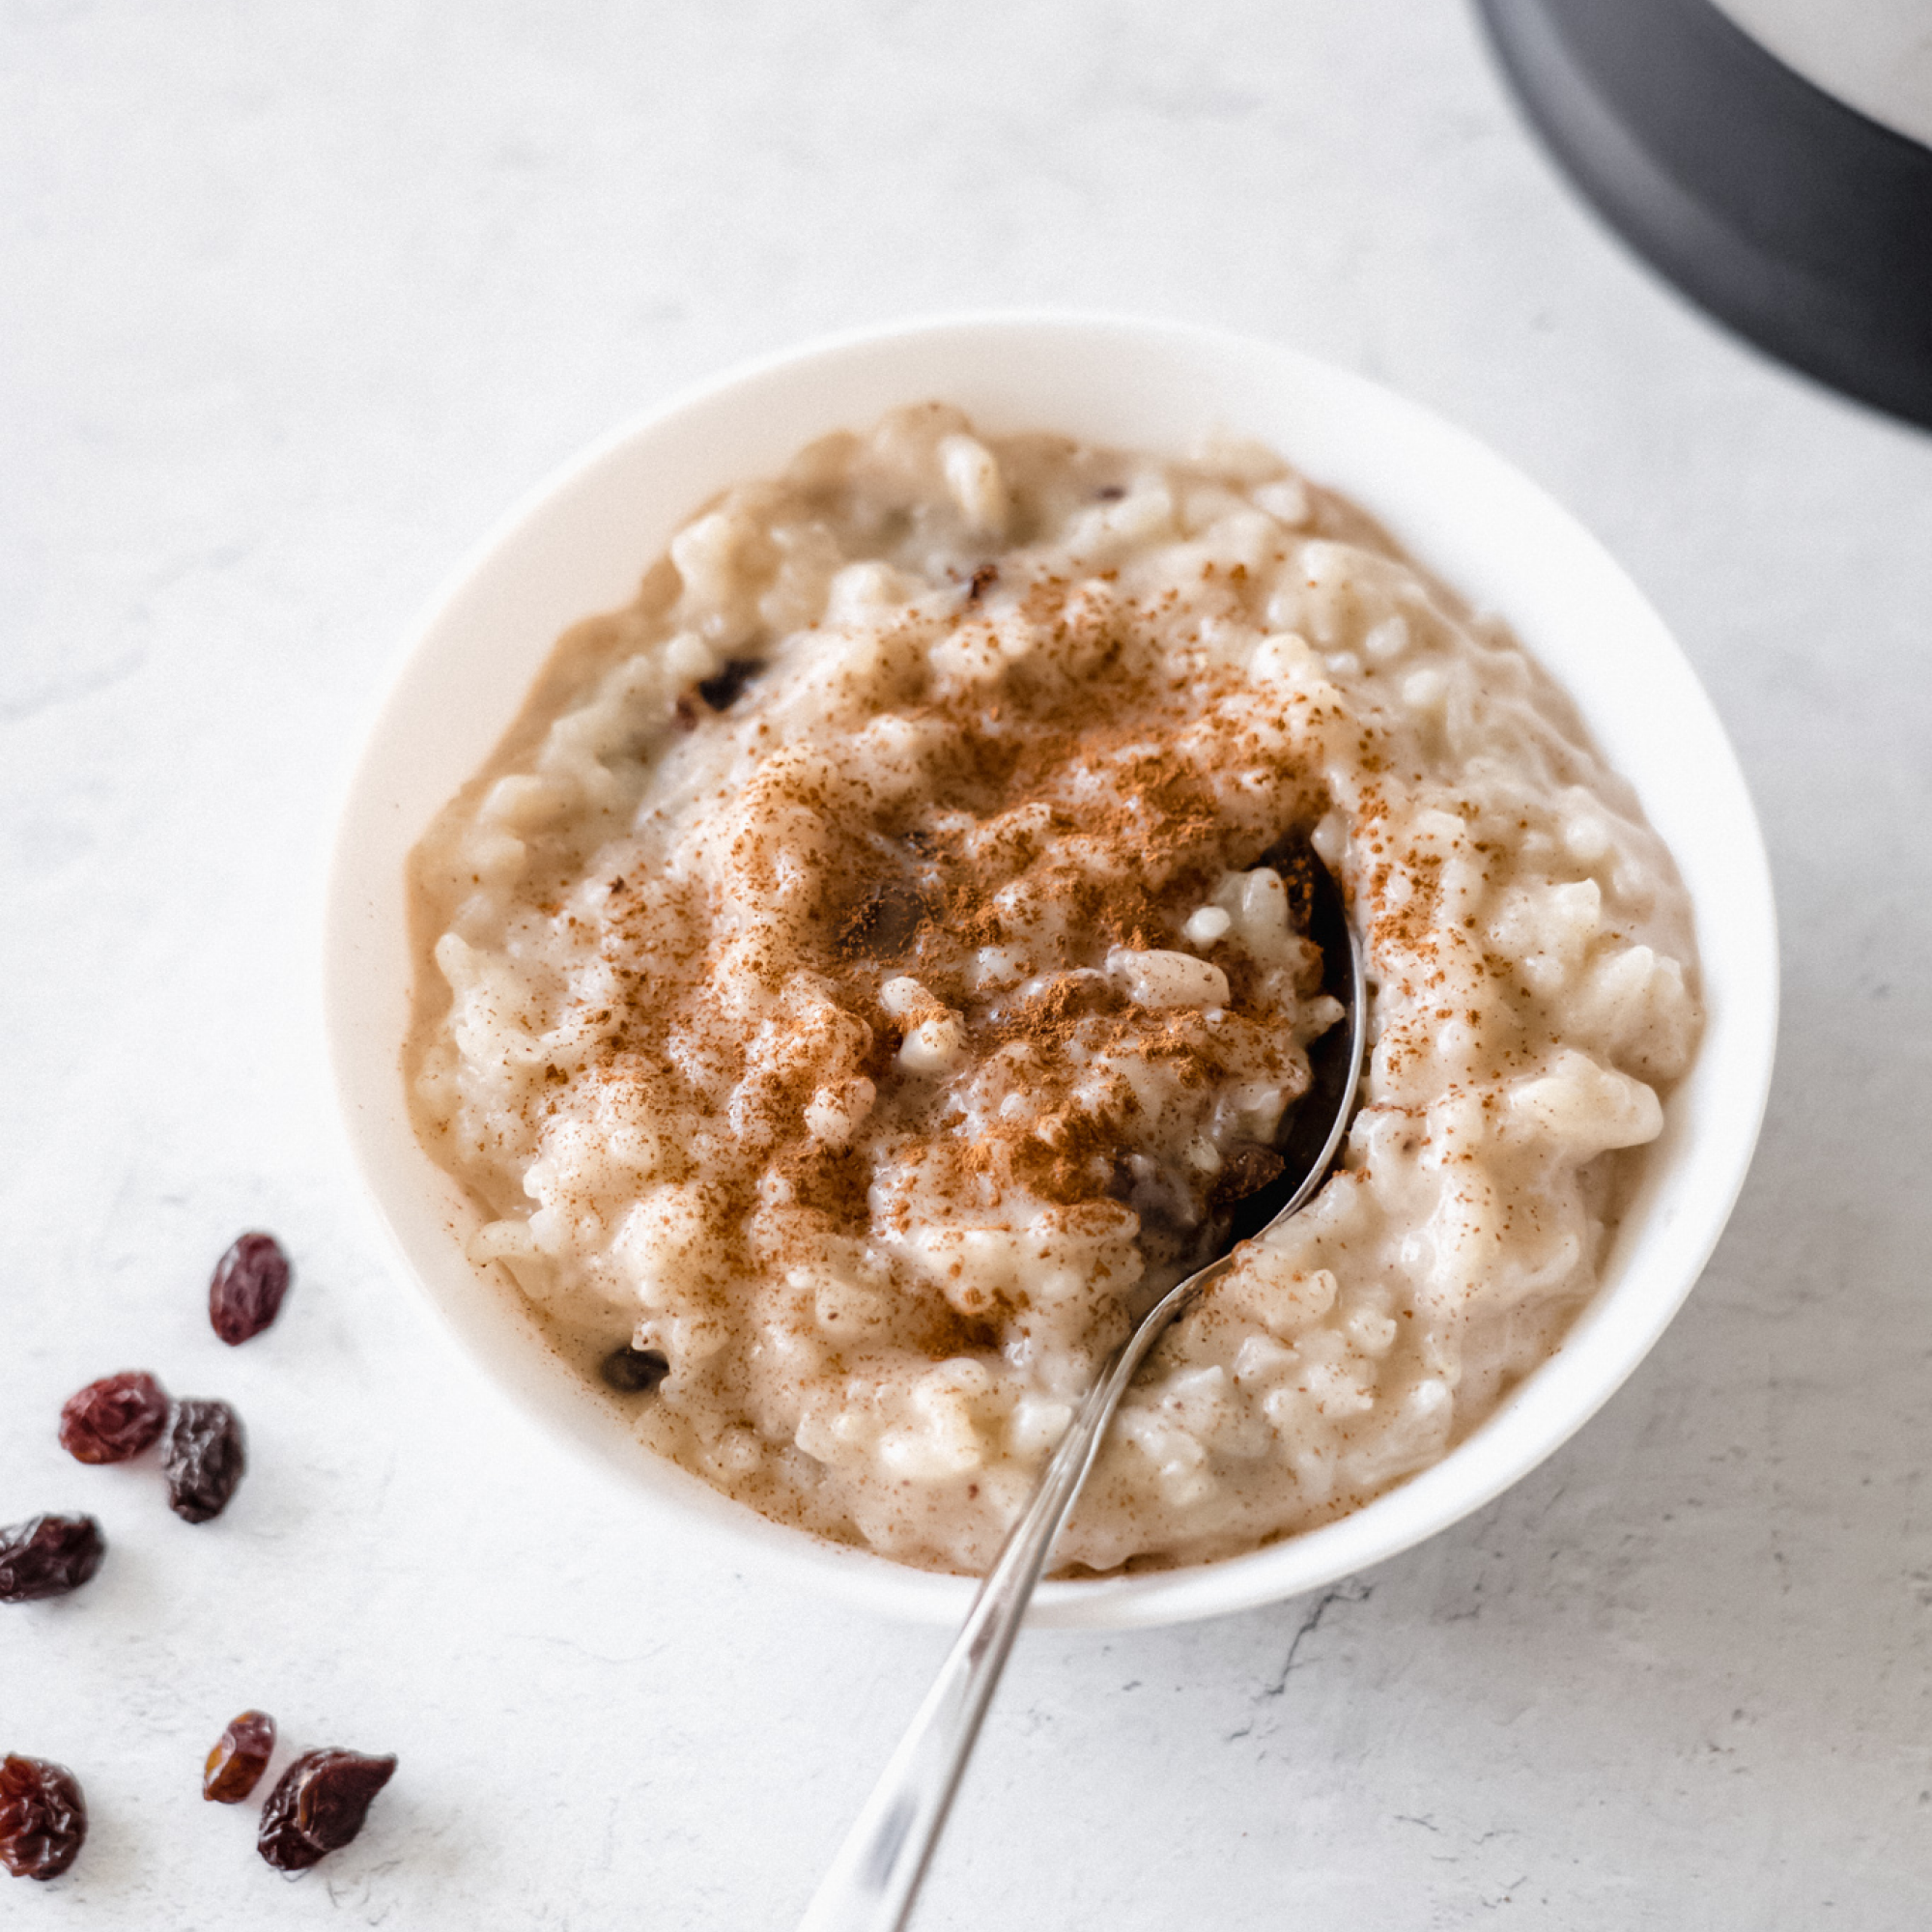 You and your Almond Cow can make the creamiest Rice Pudding ever! Only a few simple ingredients needed. Try it out today!